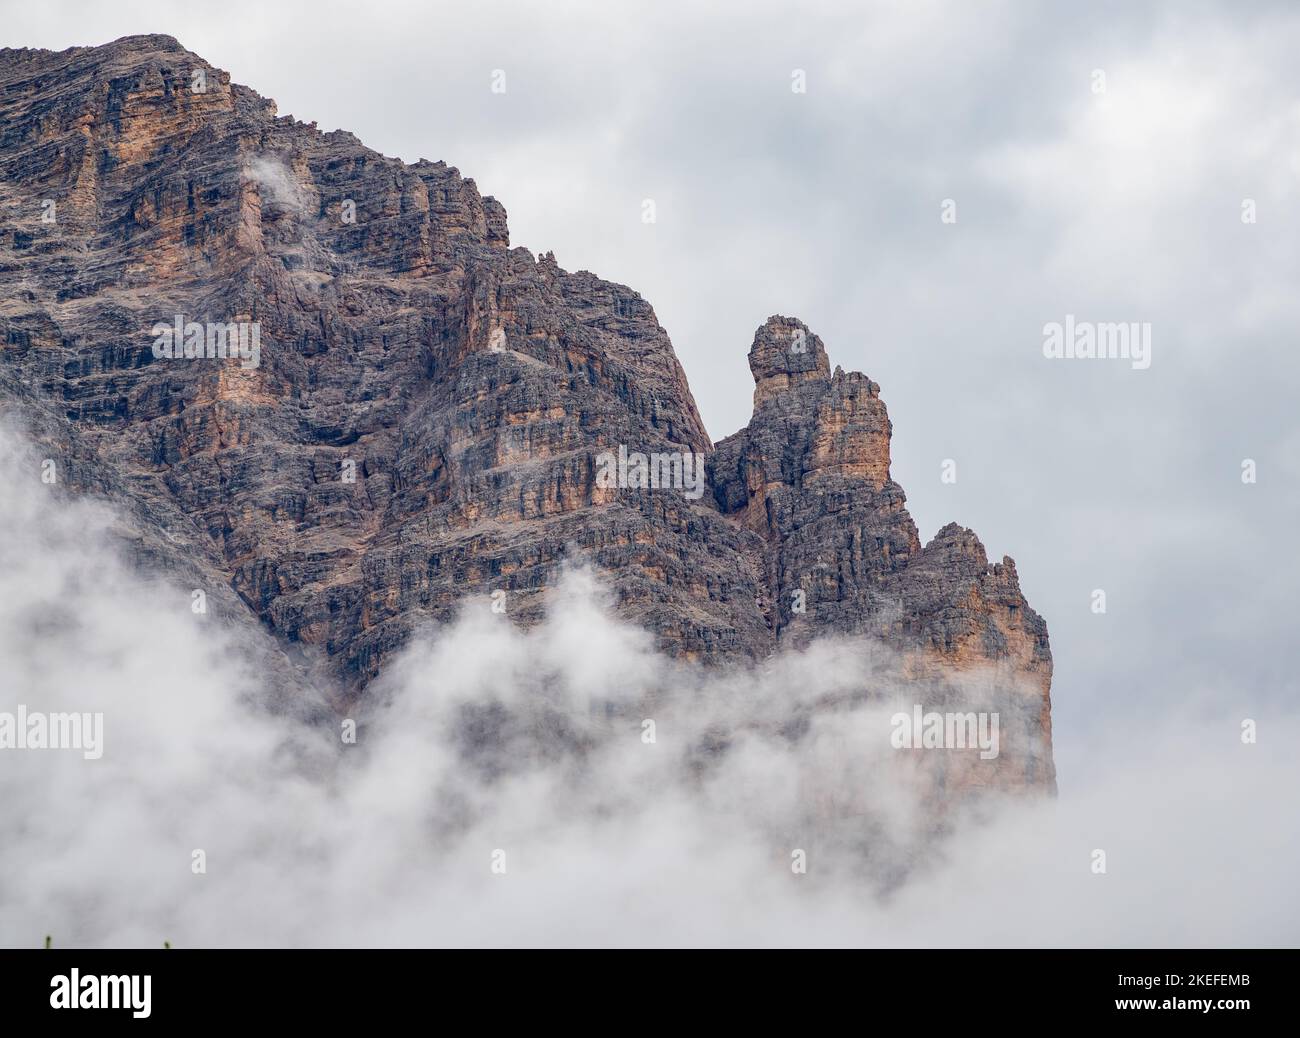 A dramatic cloudy scene in Dolomite mountains in Italy Stock Photo